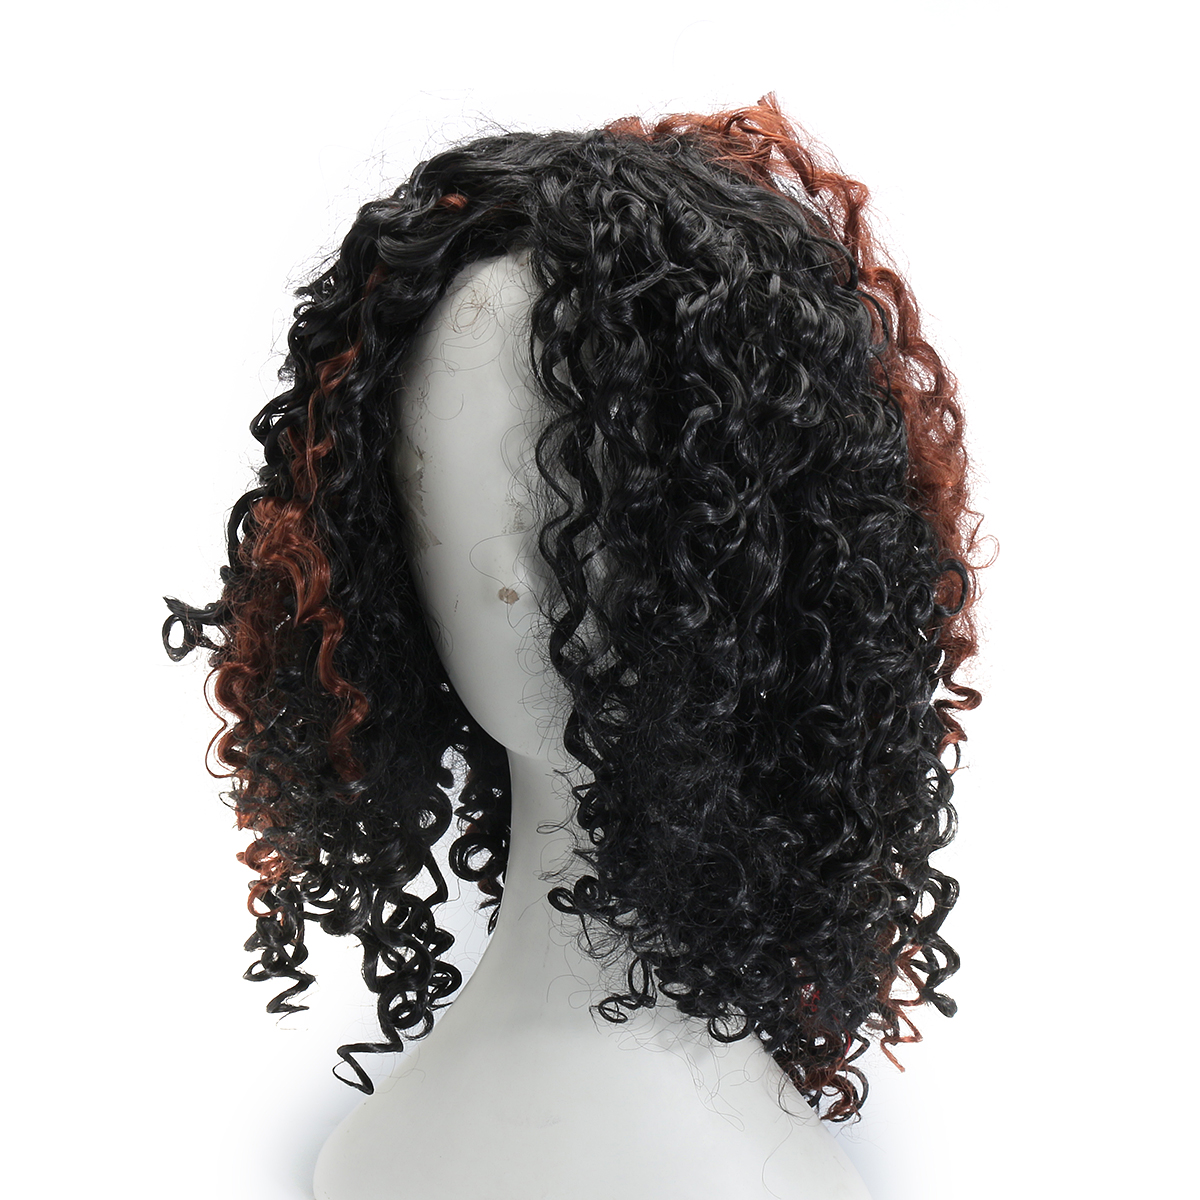 Brazilian-Black-Brown-Hair-Deep-Wavy-Curly-Lace-Front-Full-Wig-1230999